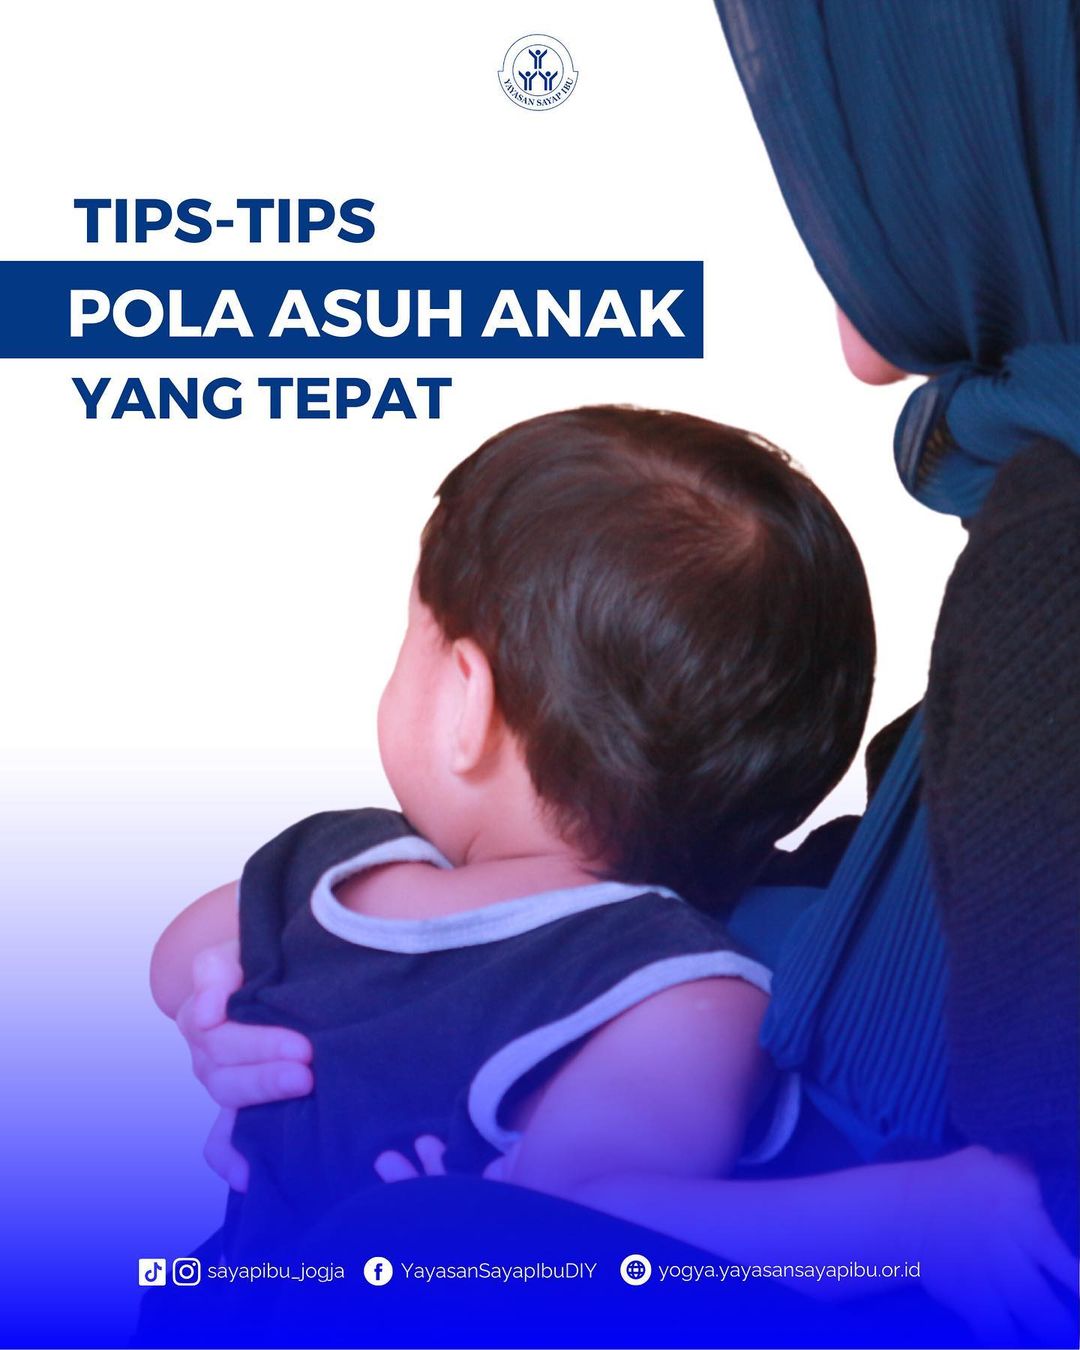 Read more about the article Tips-Tips Pola Asuh Anak yang Tepat